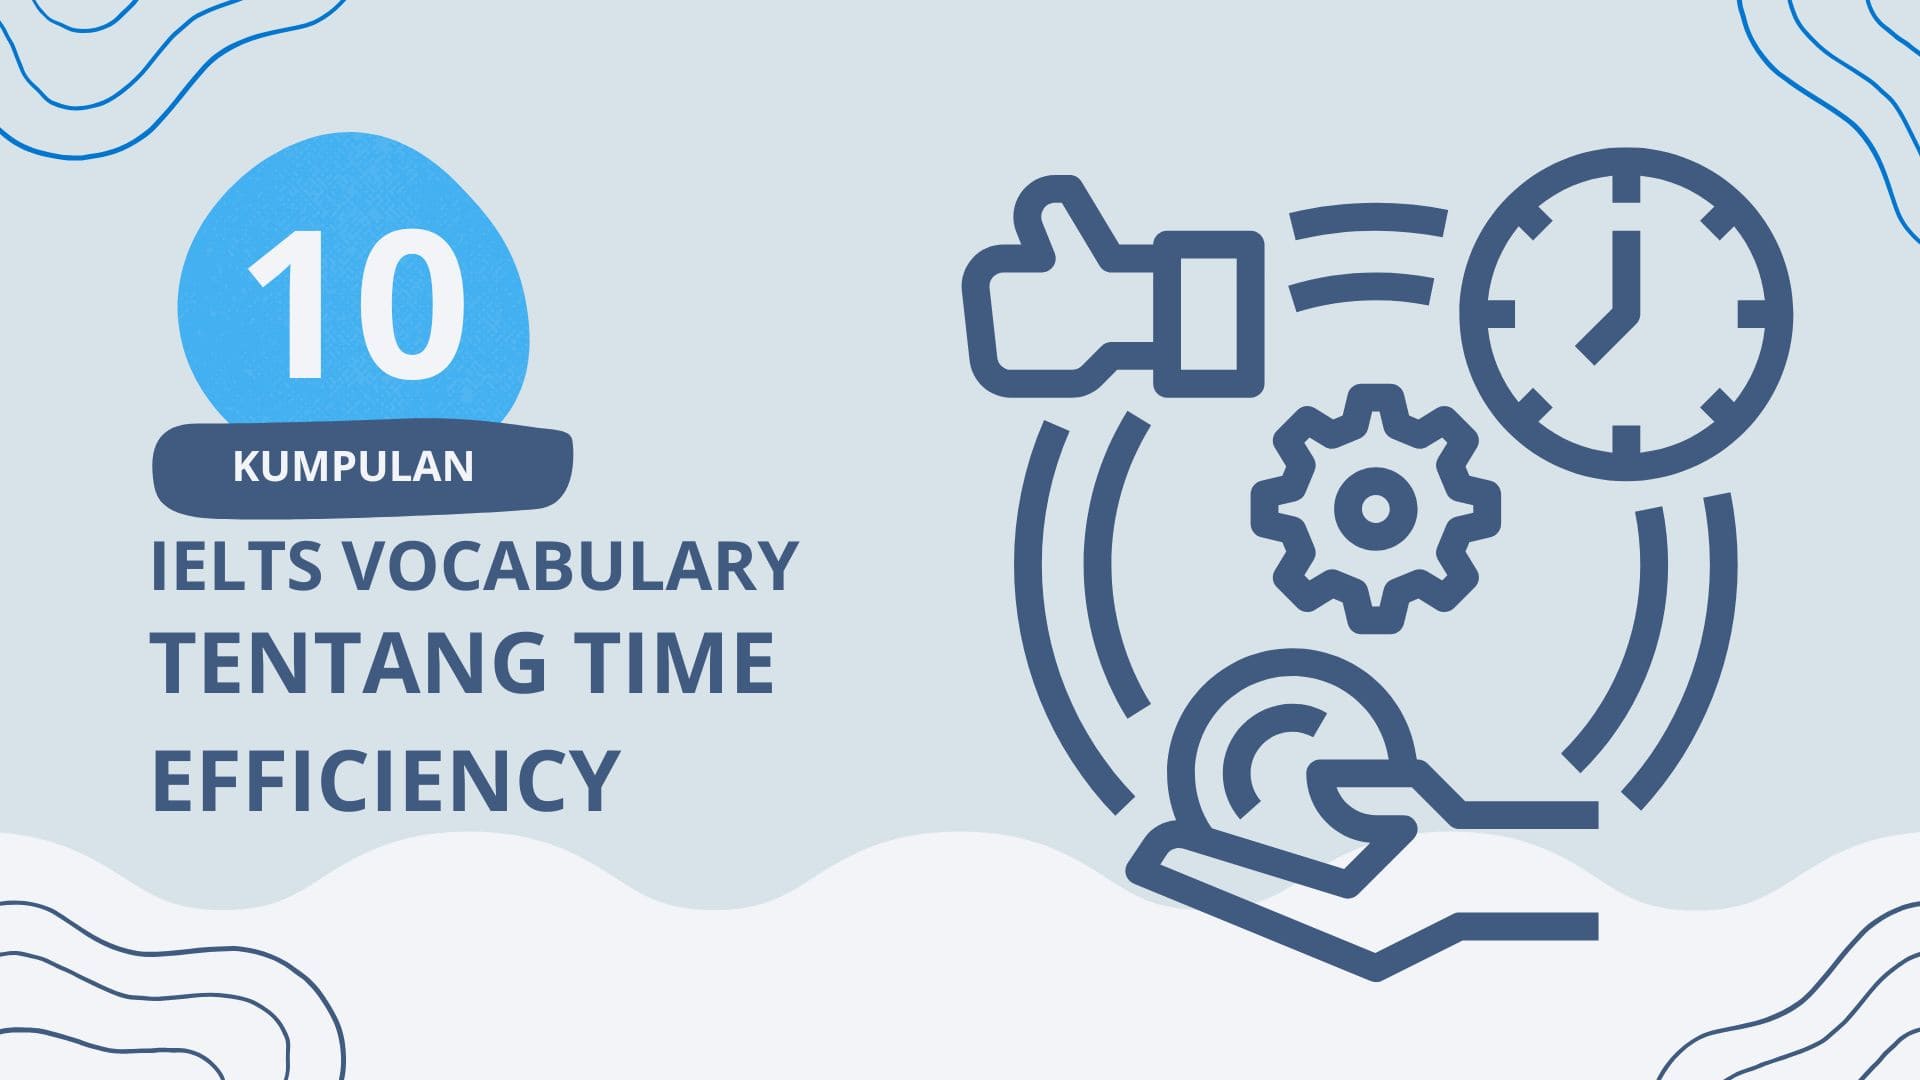 IELTS Vocabulary Tentang Time Efficiency